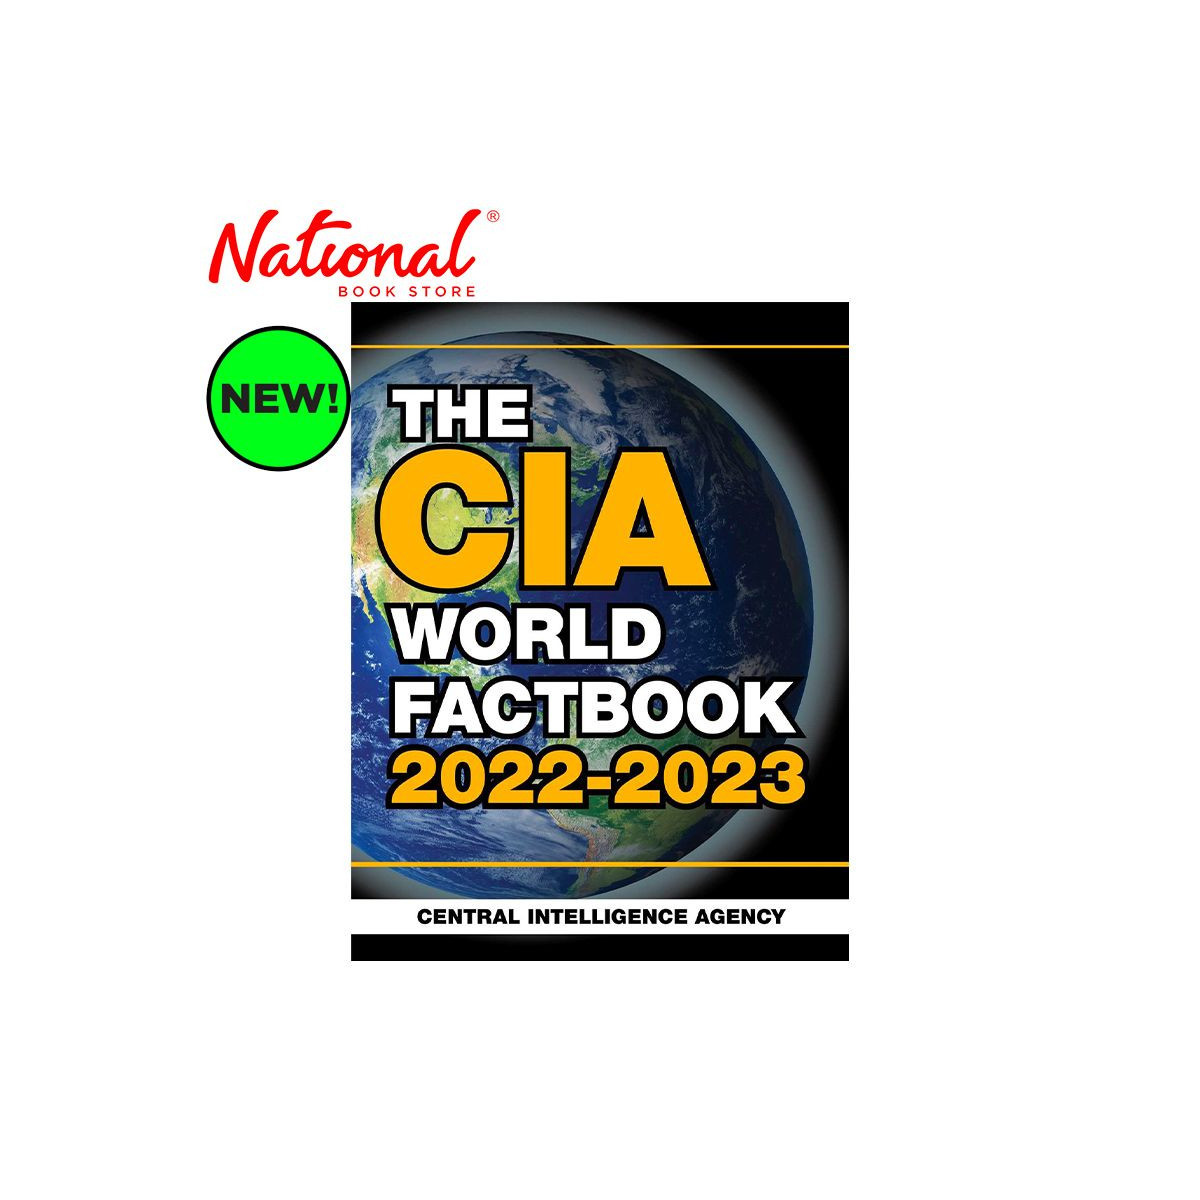 The CIA World Factbook 2022-2023 by Central Intelligence Agency - Trade Paperback - Current Events